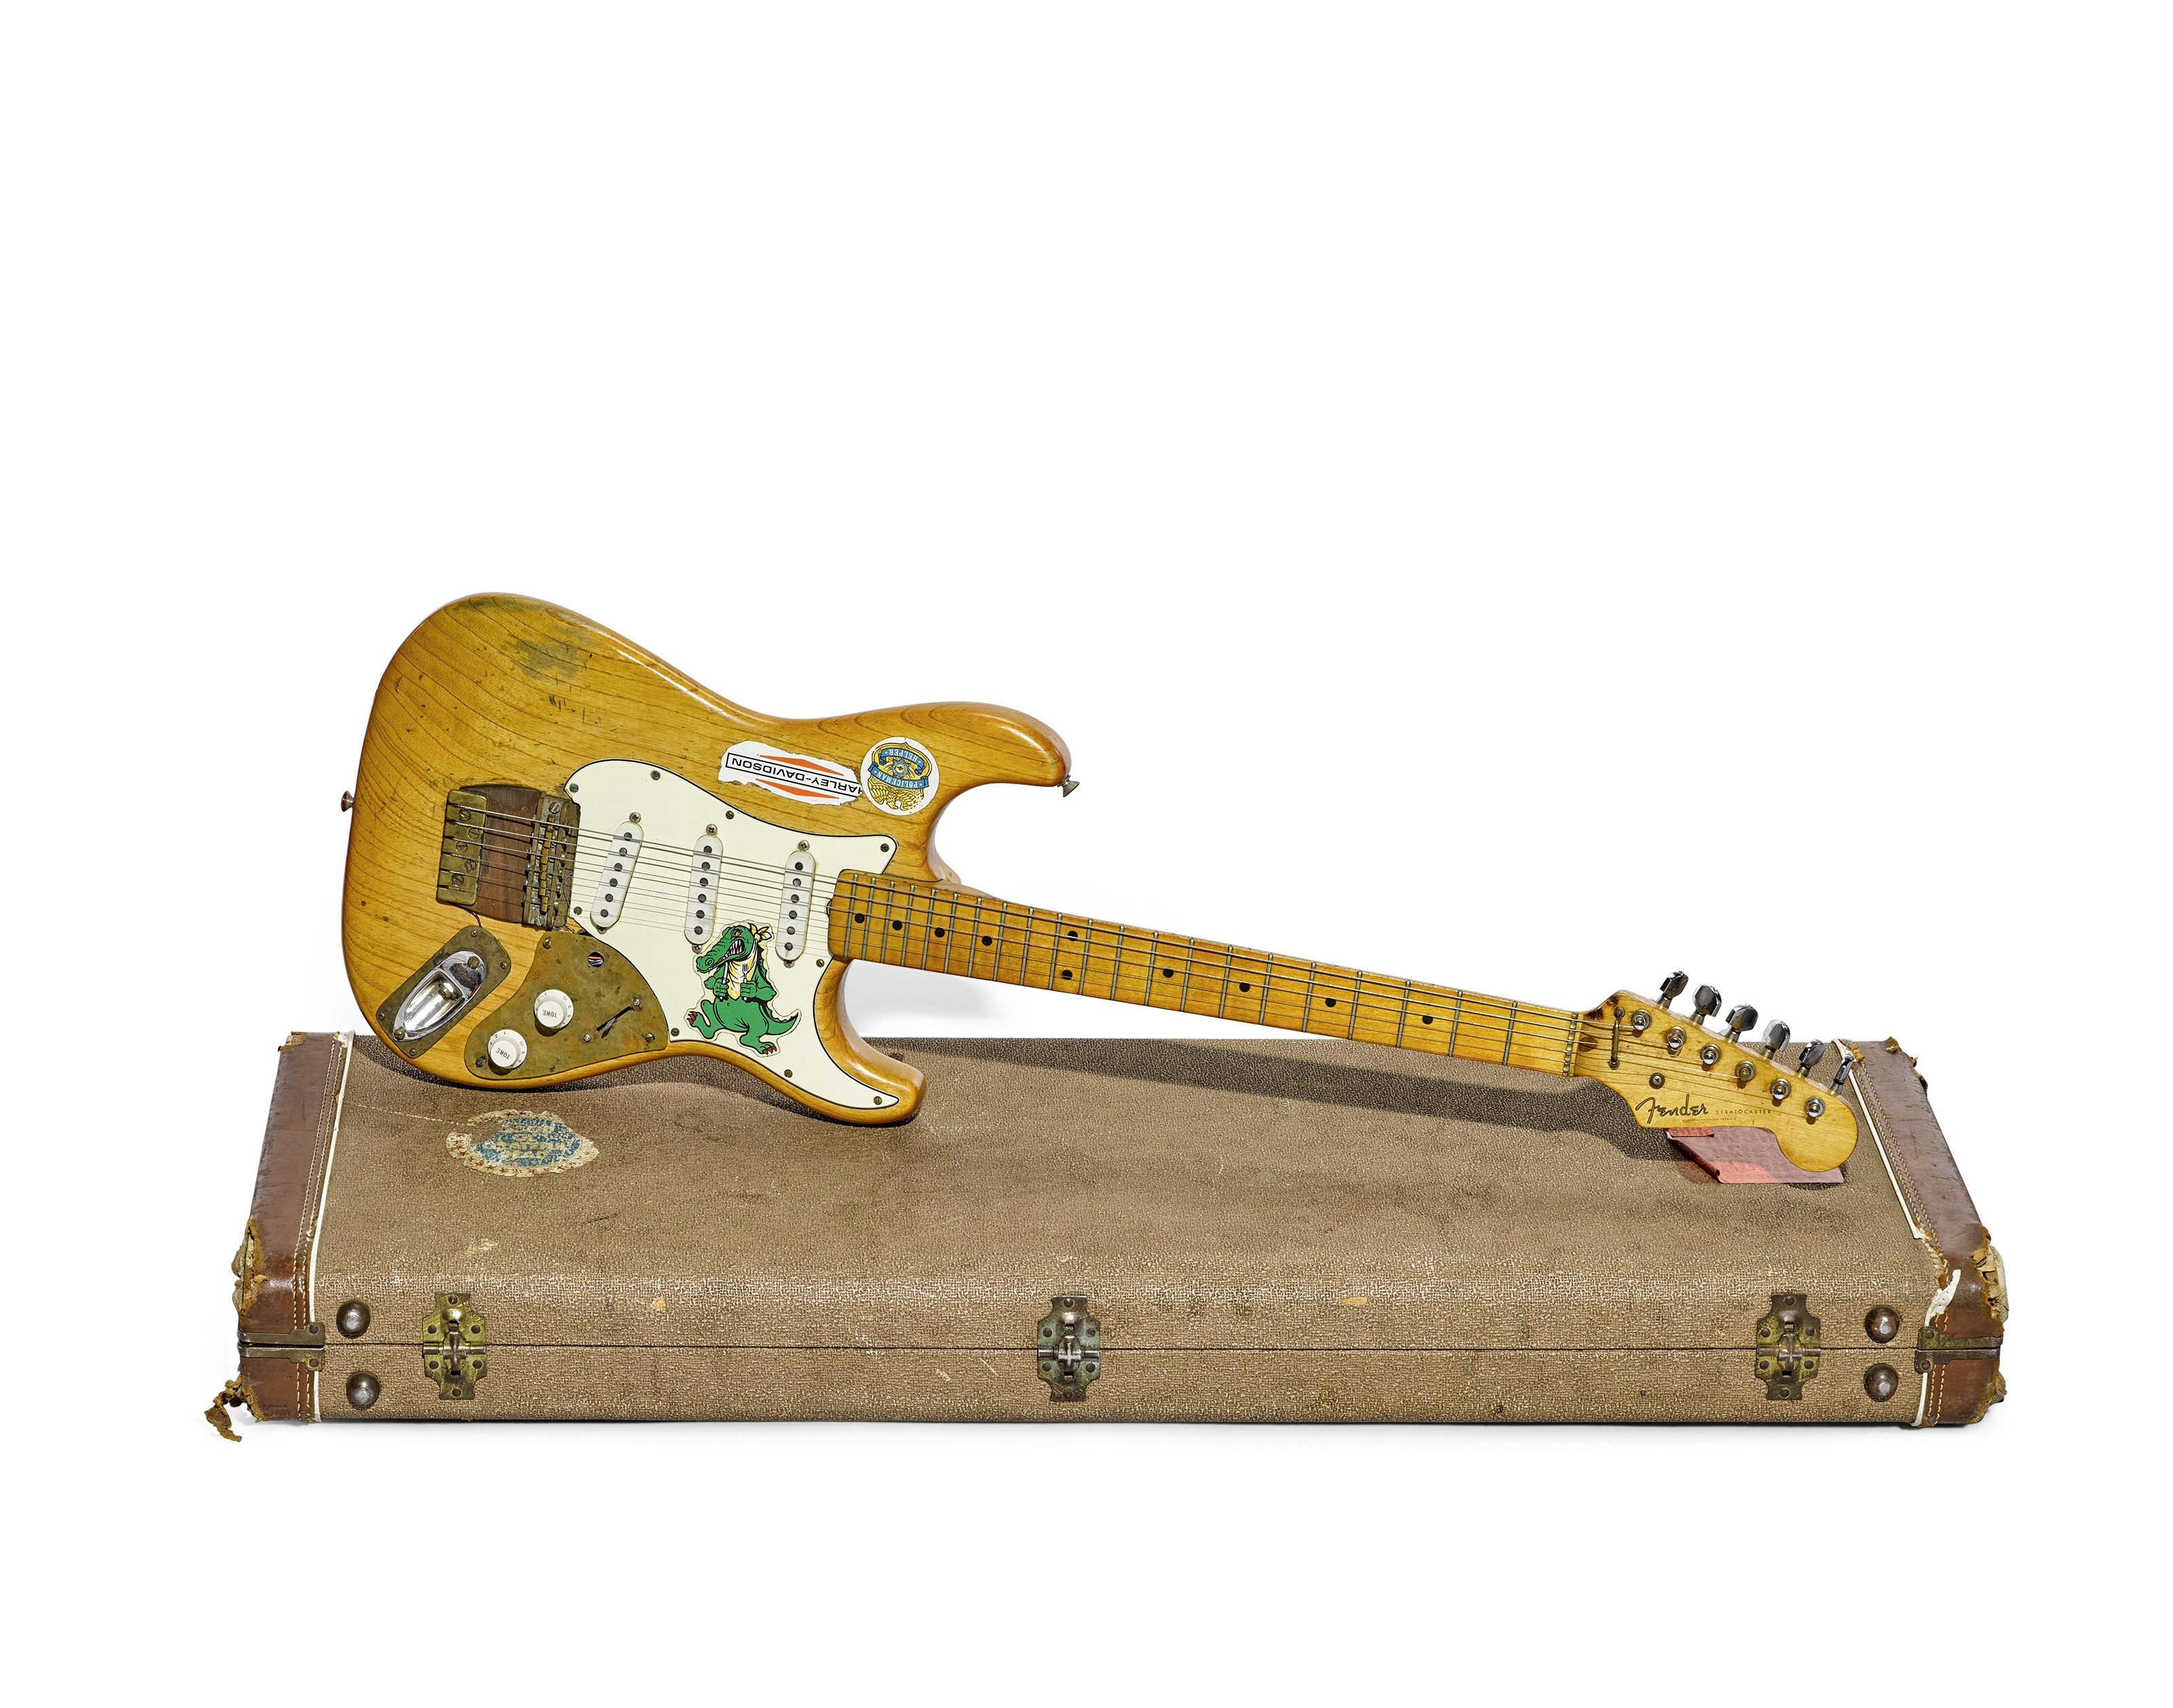 ALLIGATOR! A FENDER STRATOCASTER OWNED AND PLAYED BY JERRY GARCIA OF THE GRATEFUL DEAD - Image 7 of 7